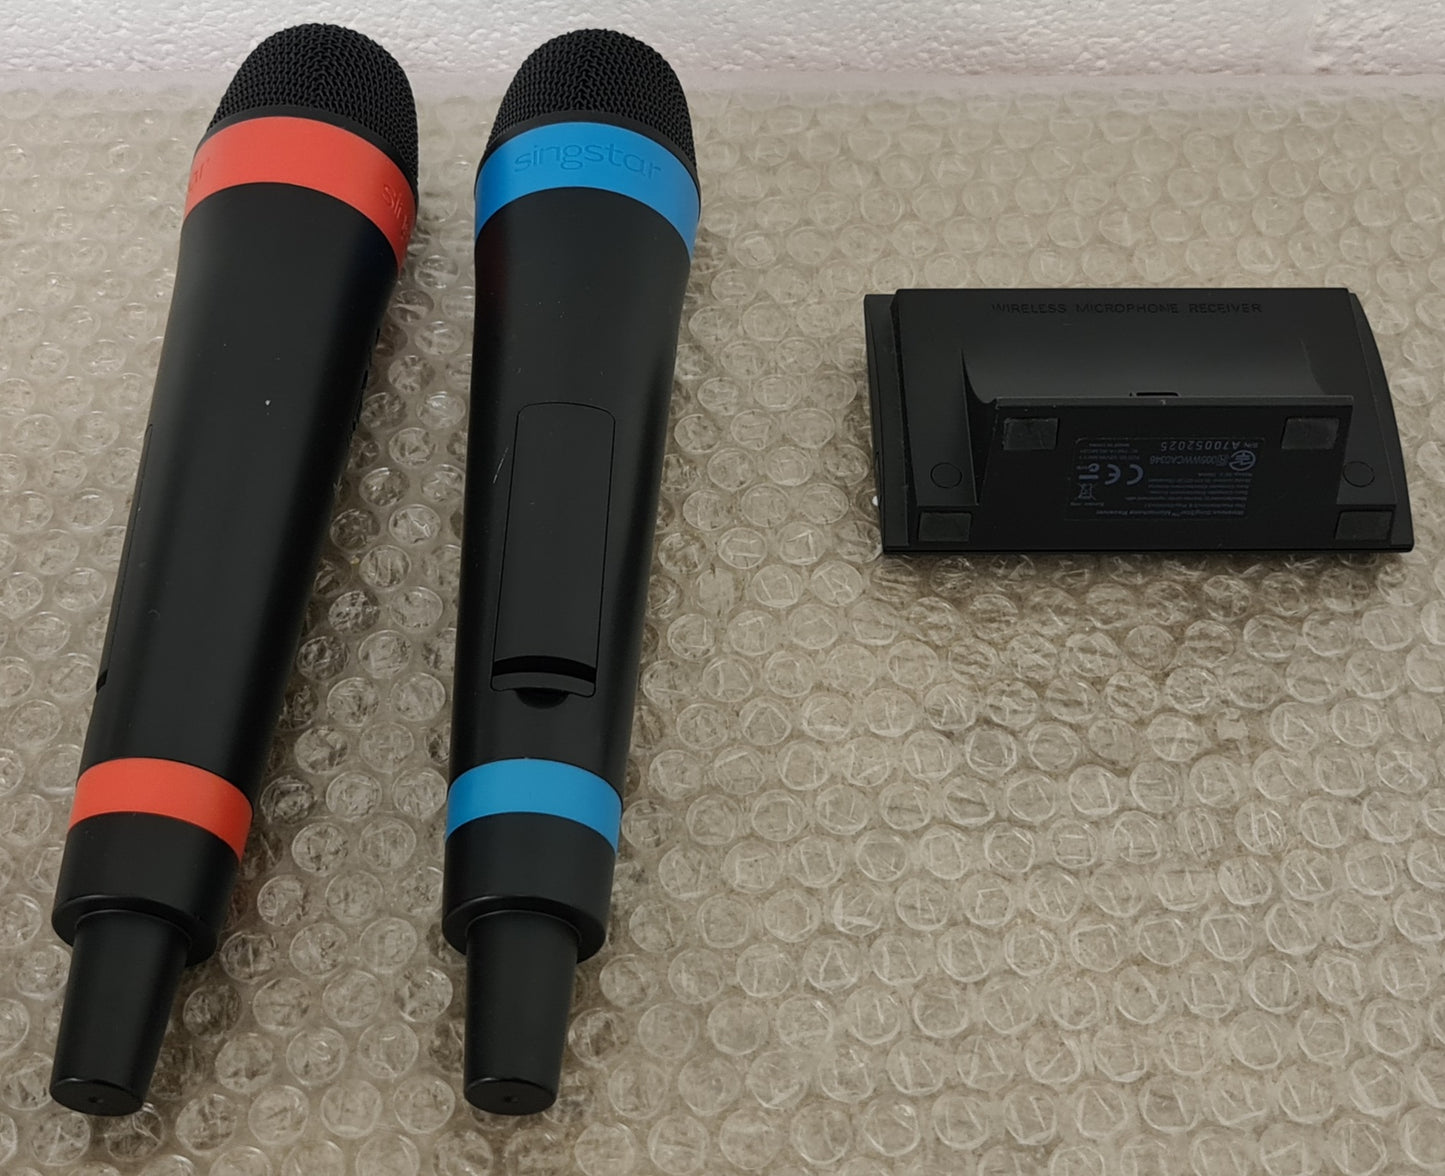 Singstar Wireless Microphones Sony Playstation 3 (PS3) Accessory